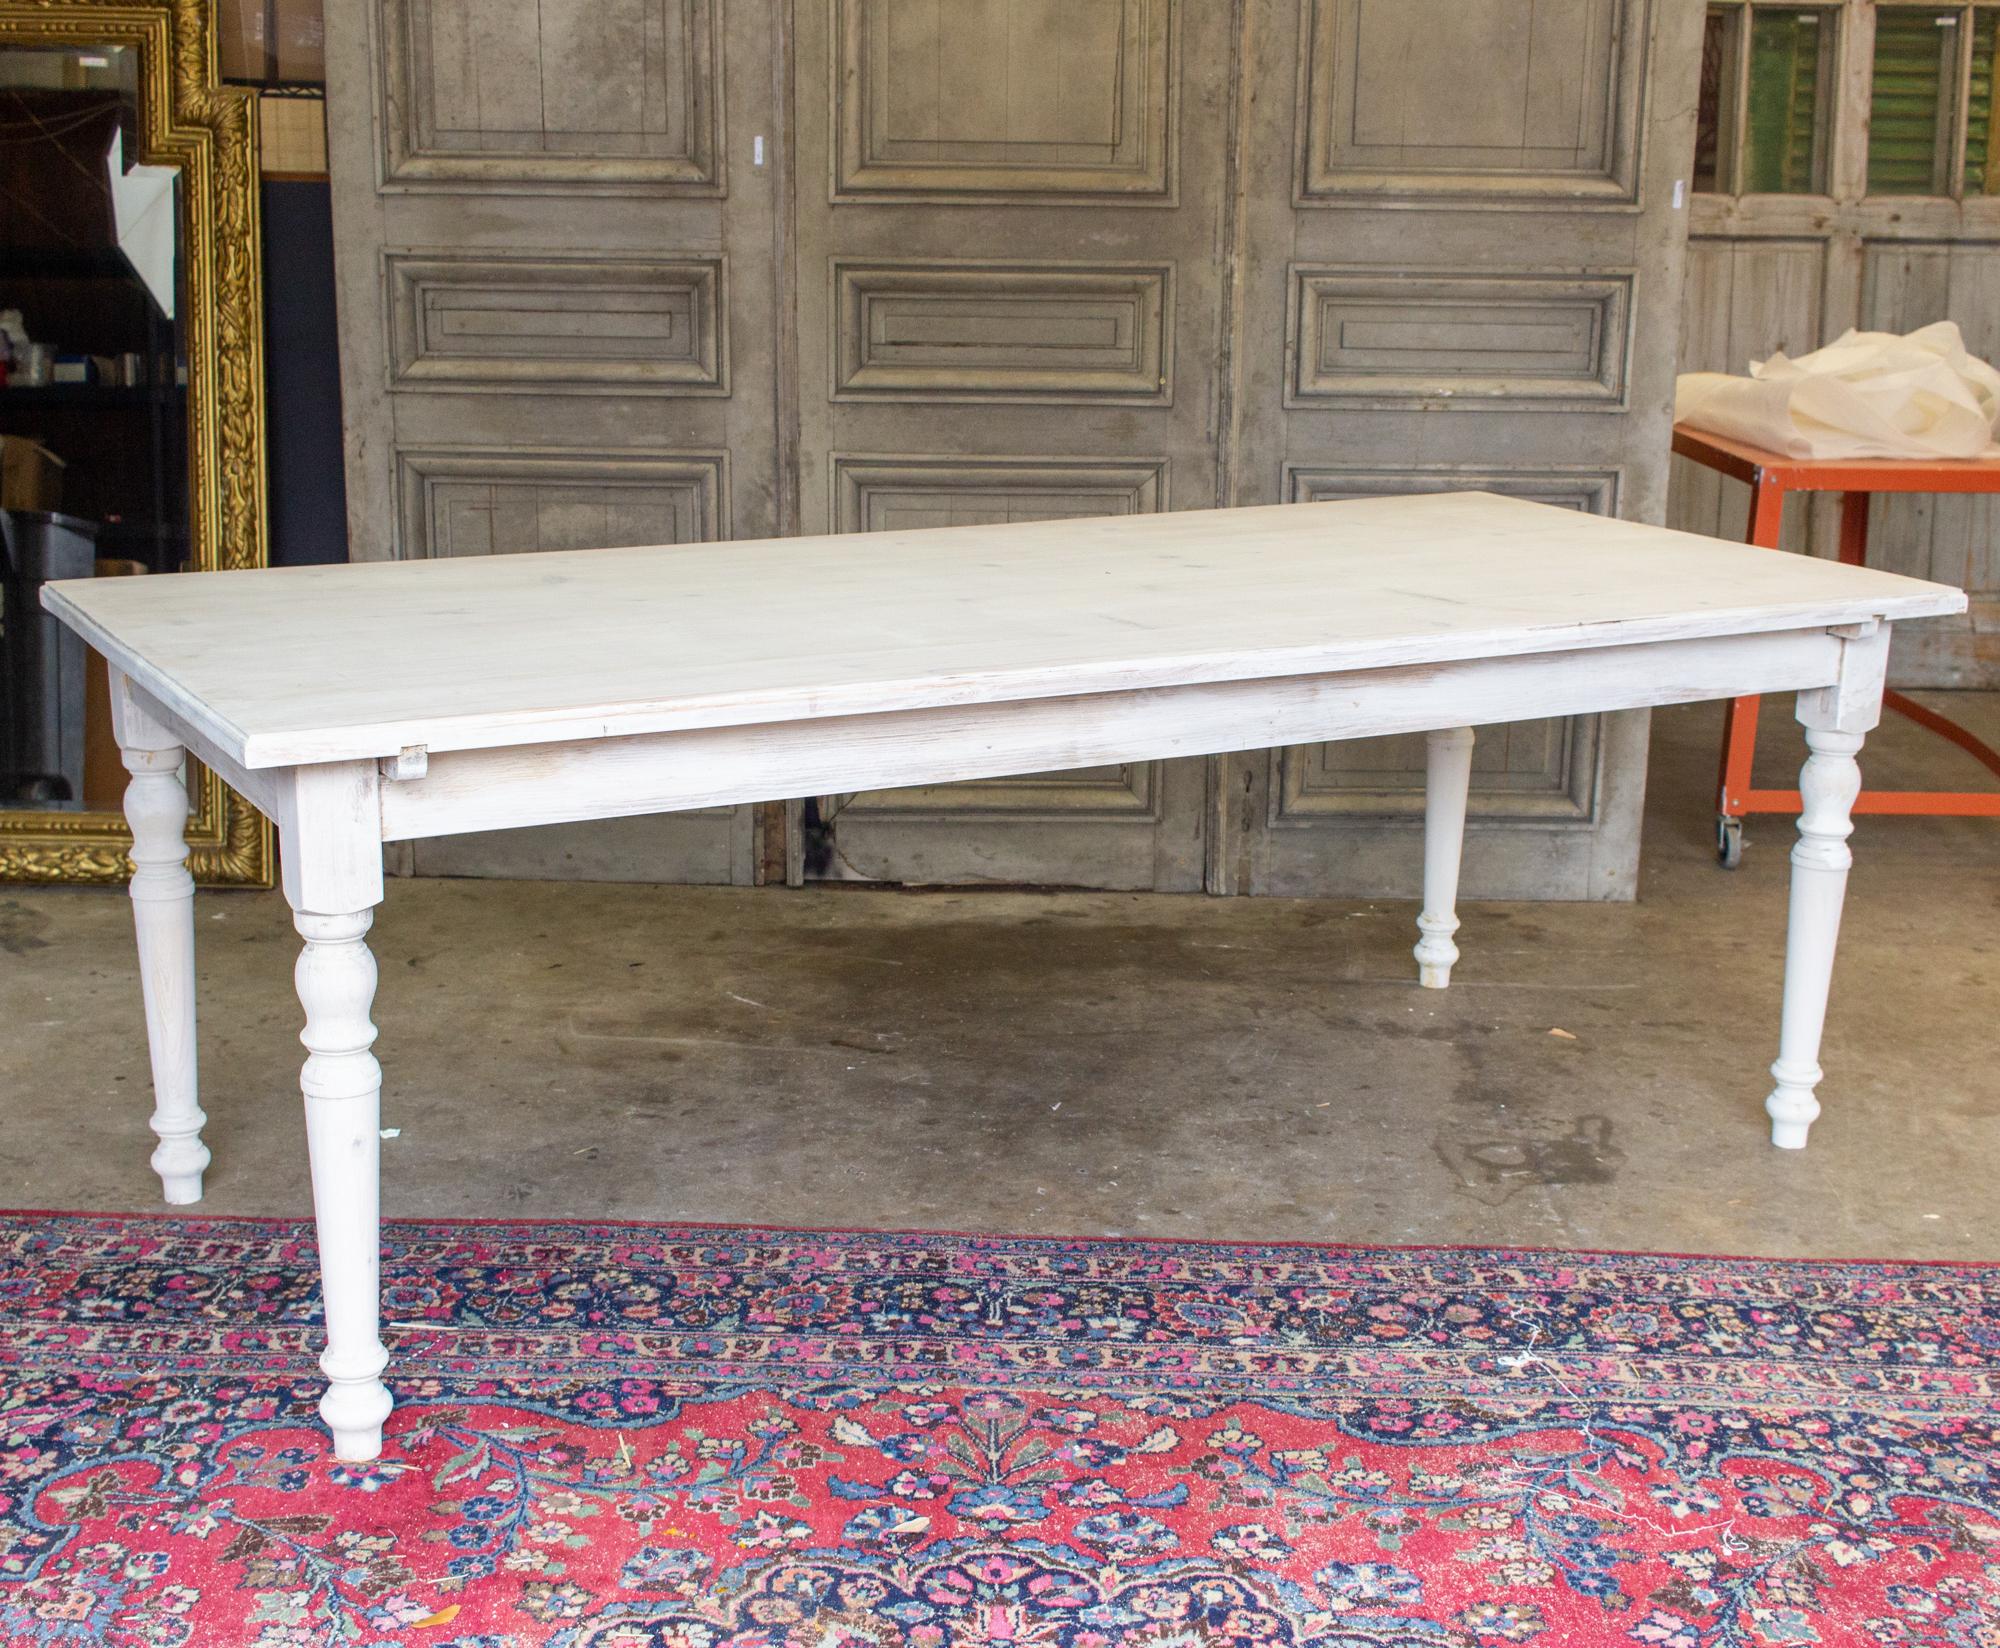 Hand-Painted Large Pine Farm Table and Worktable with Drawer in Whitewash Painted Finish